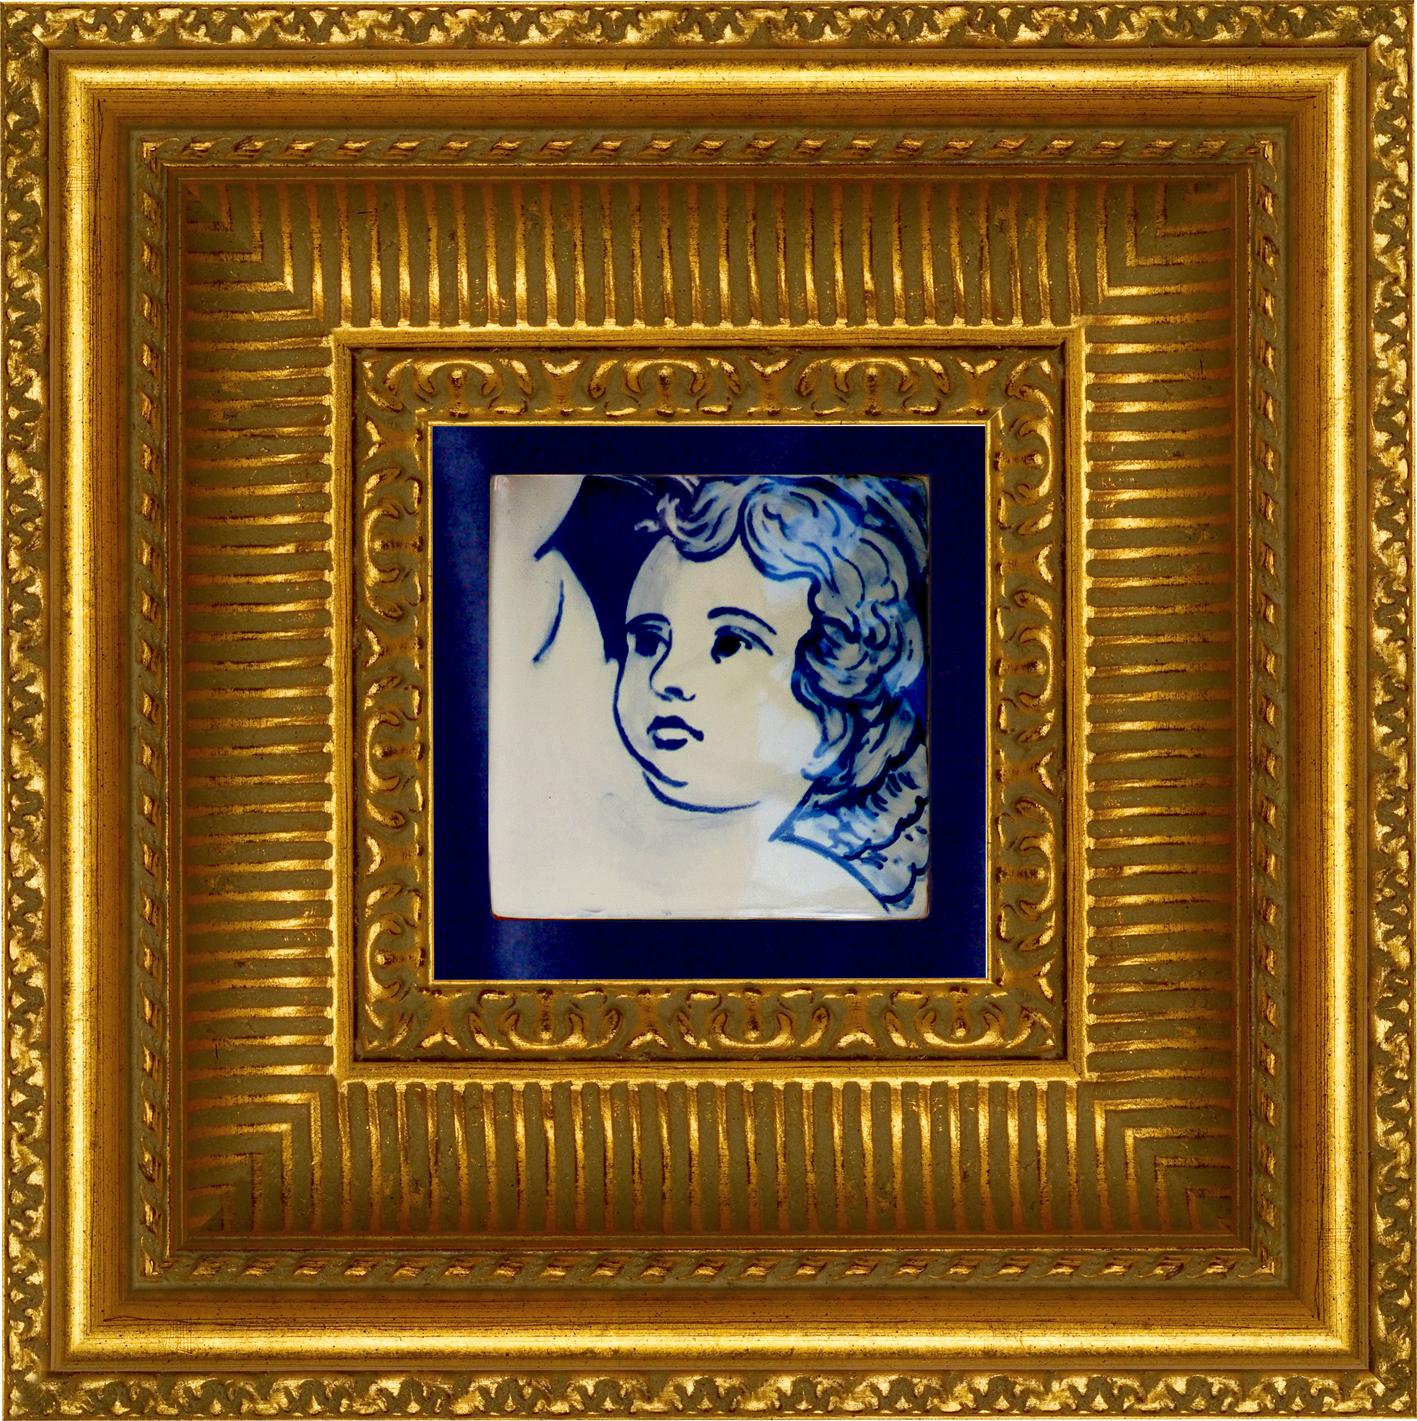 Gorgeous blue hand-painted Baroque cherub or angel 18th century style Portuguese ceramic tile or azulejo.
The tile painted in cobalt blue over white in typical 18th century Portugal set the taste for monumental ceramic tile applications in churches